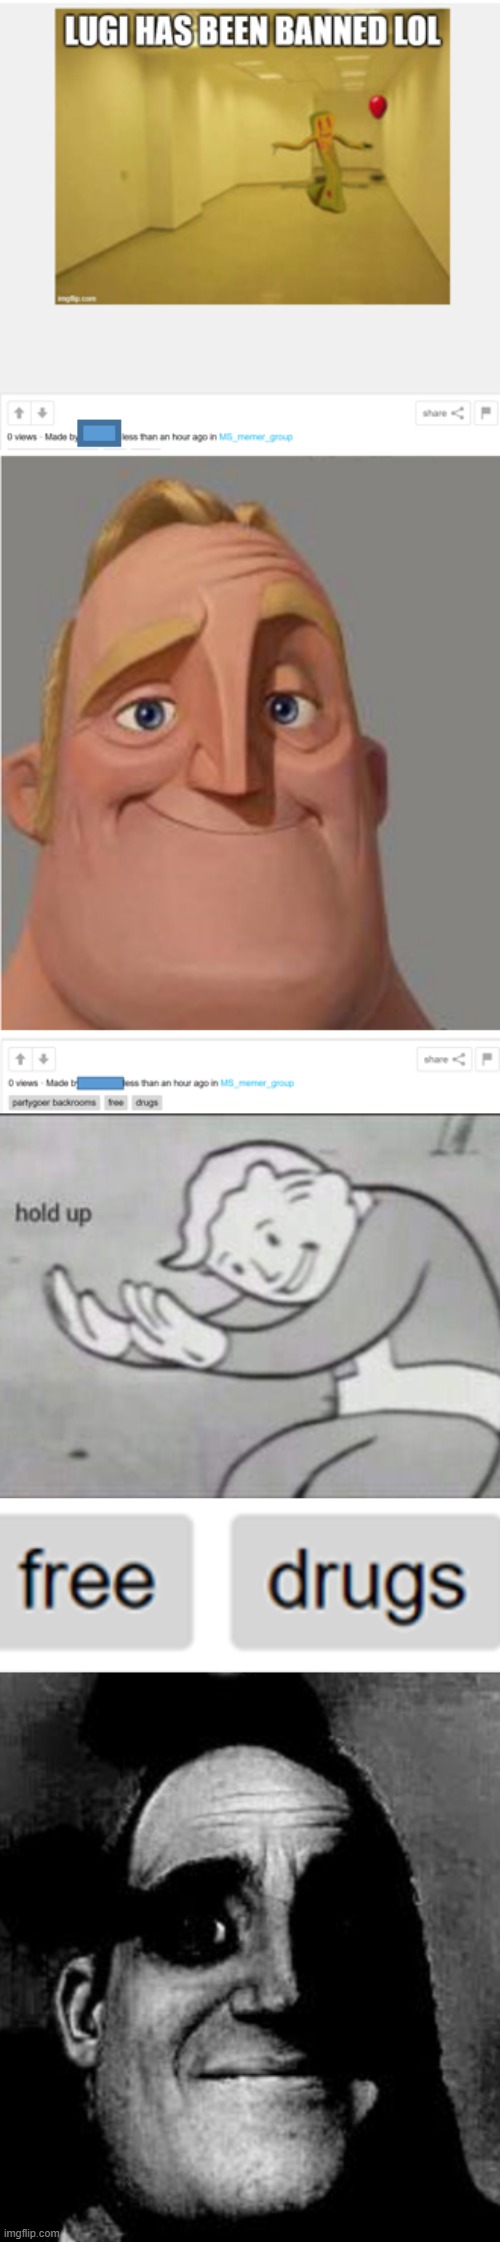 OMG | image tagged in omg,free,drugs | made w/ Imgflip meme maker